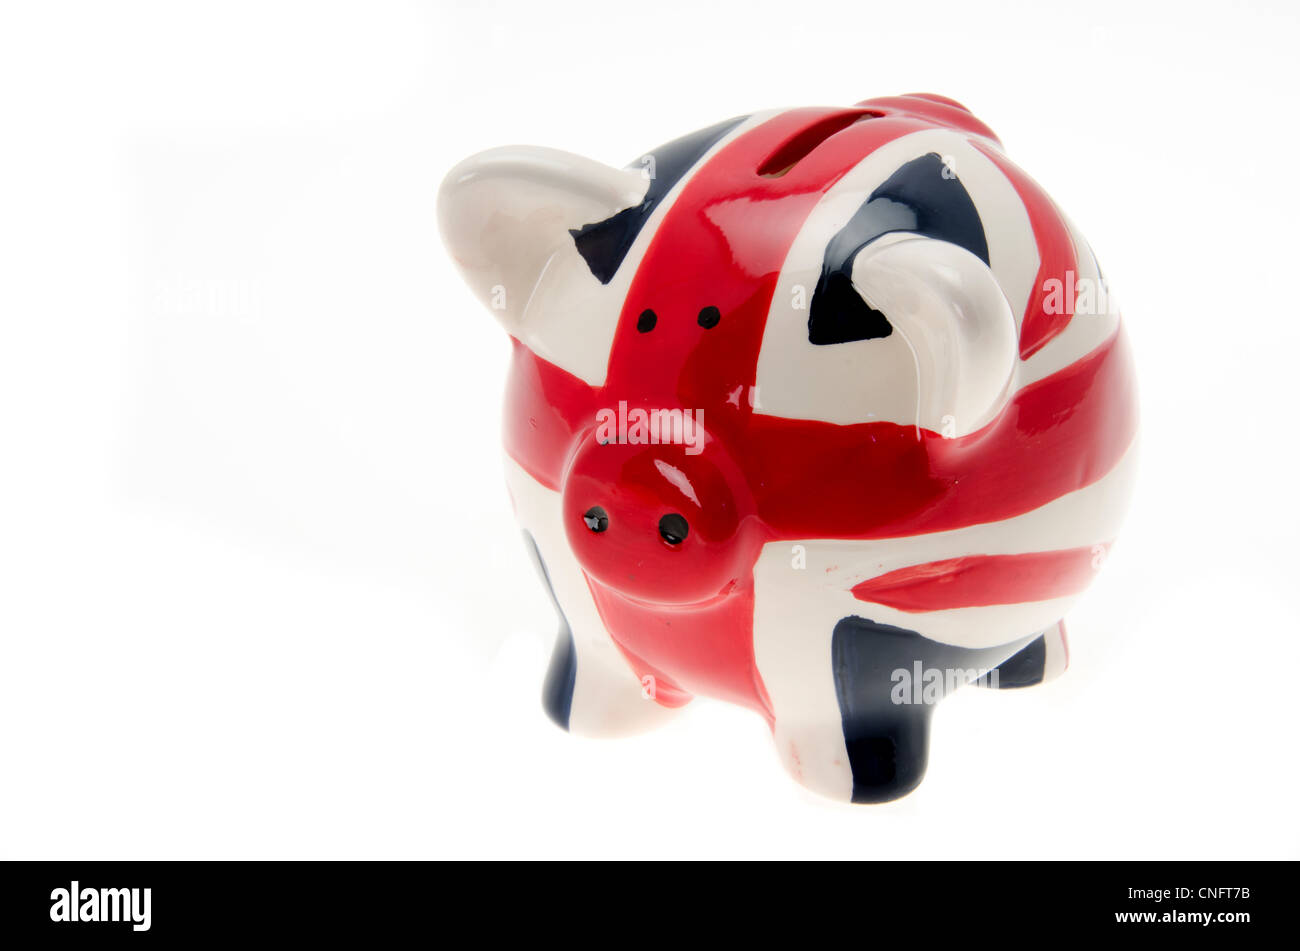 Piggy bank money box painted with a UK flag design 'Union Jack' - isolated against a white background Stock Photo